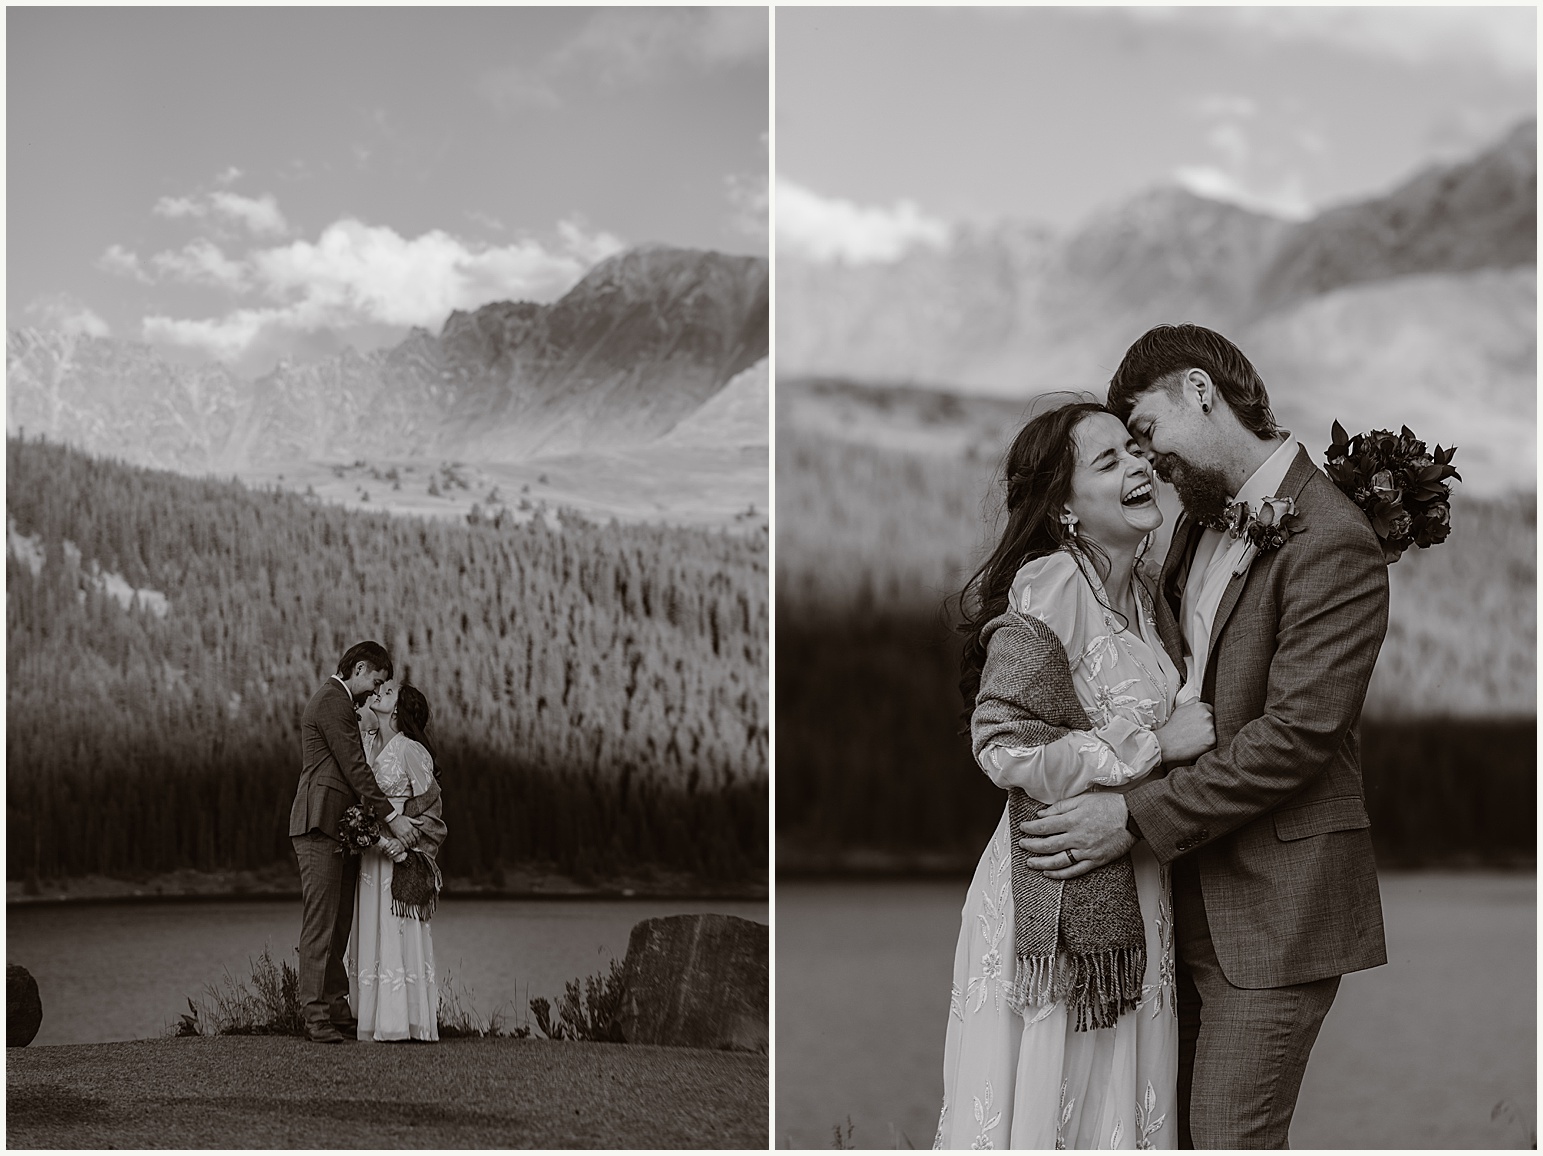 Snuggling in close for a kiss, this black and white photo series shows a bride and groom during Breckenridge mountain elopement.